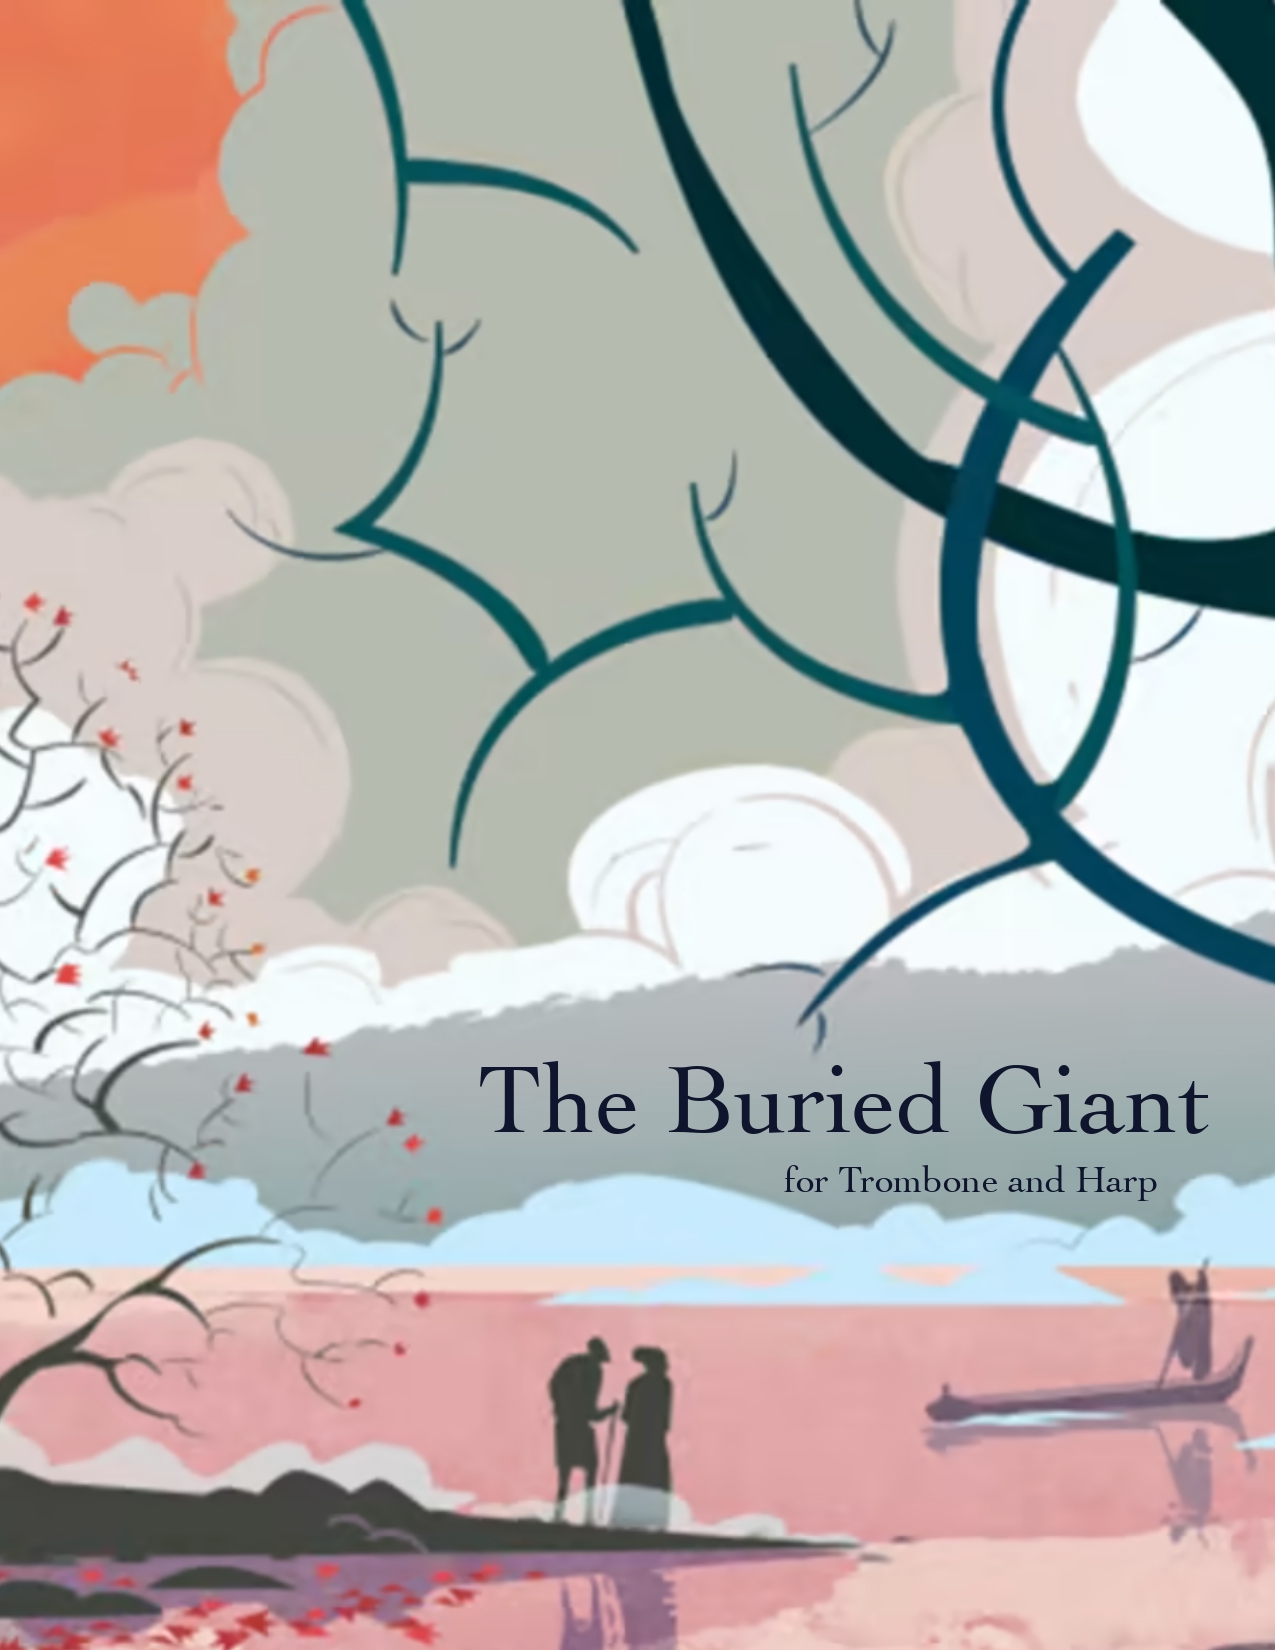 The Buried Giant Score for Trombone and Harp